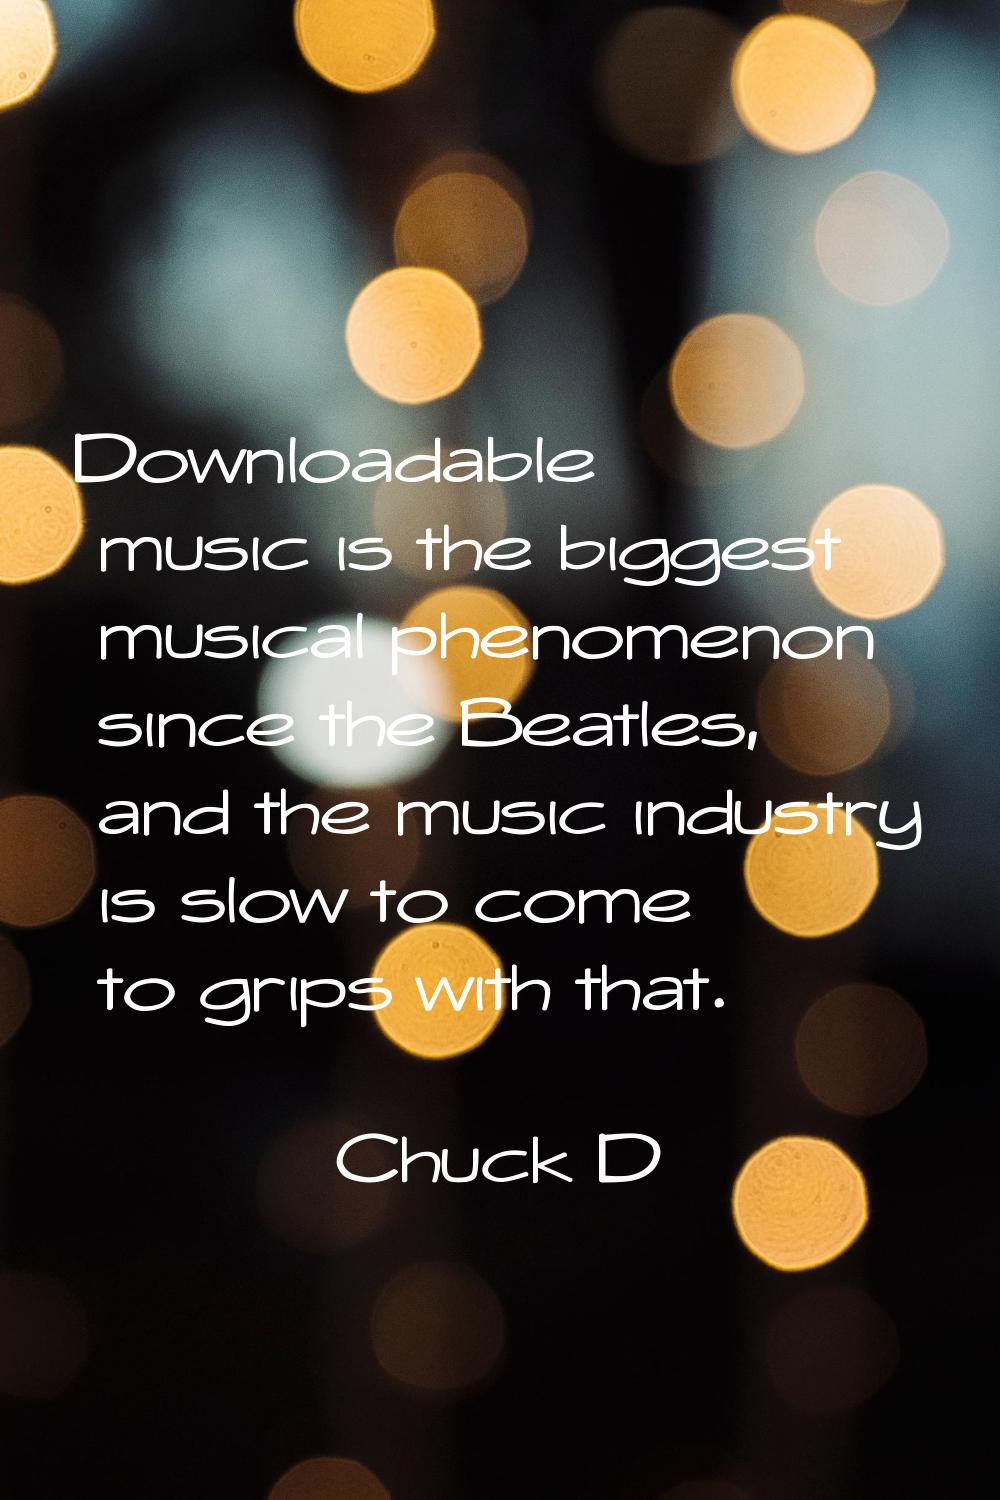 Downloadable music is the biggest musical phenomenon since the Beatles, and the music industry is s